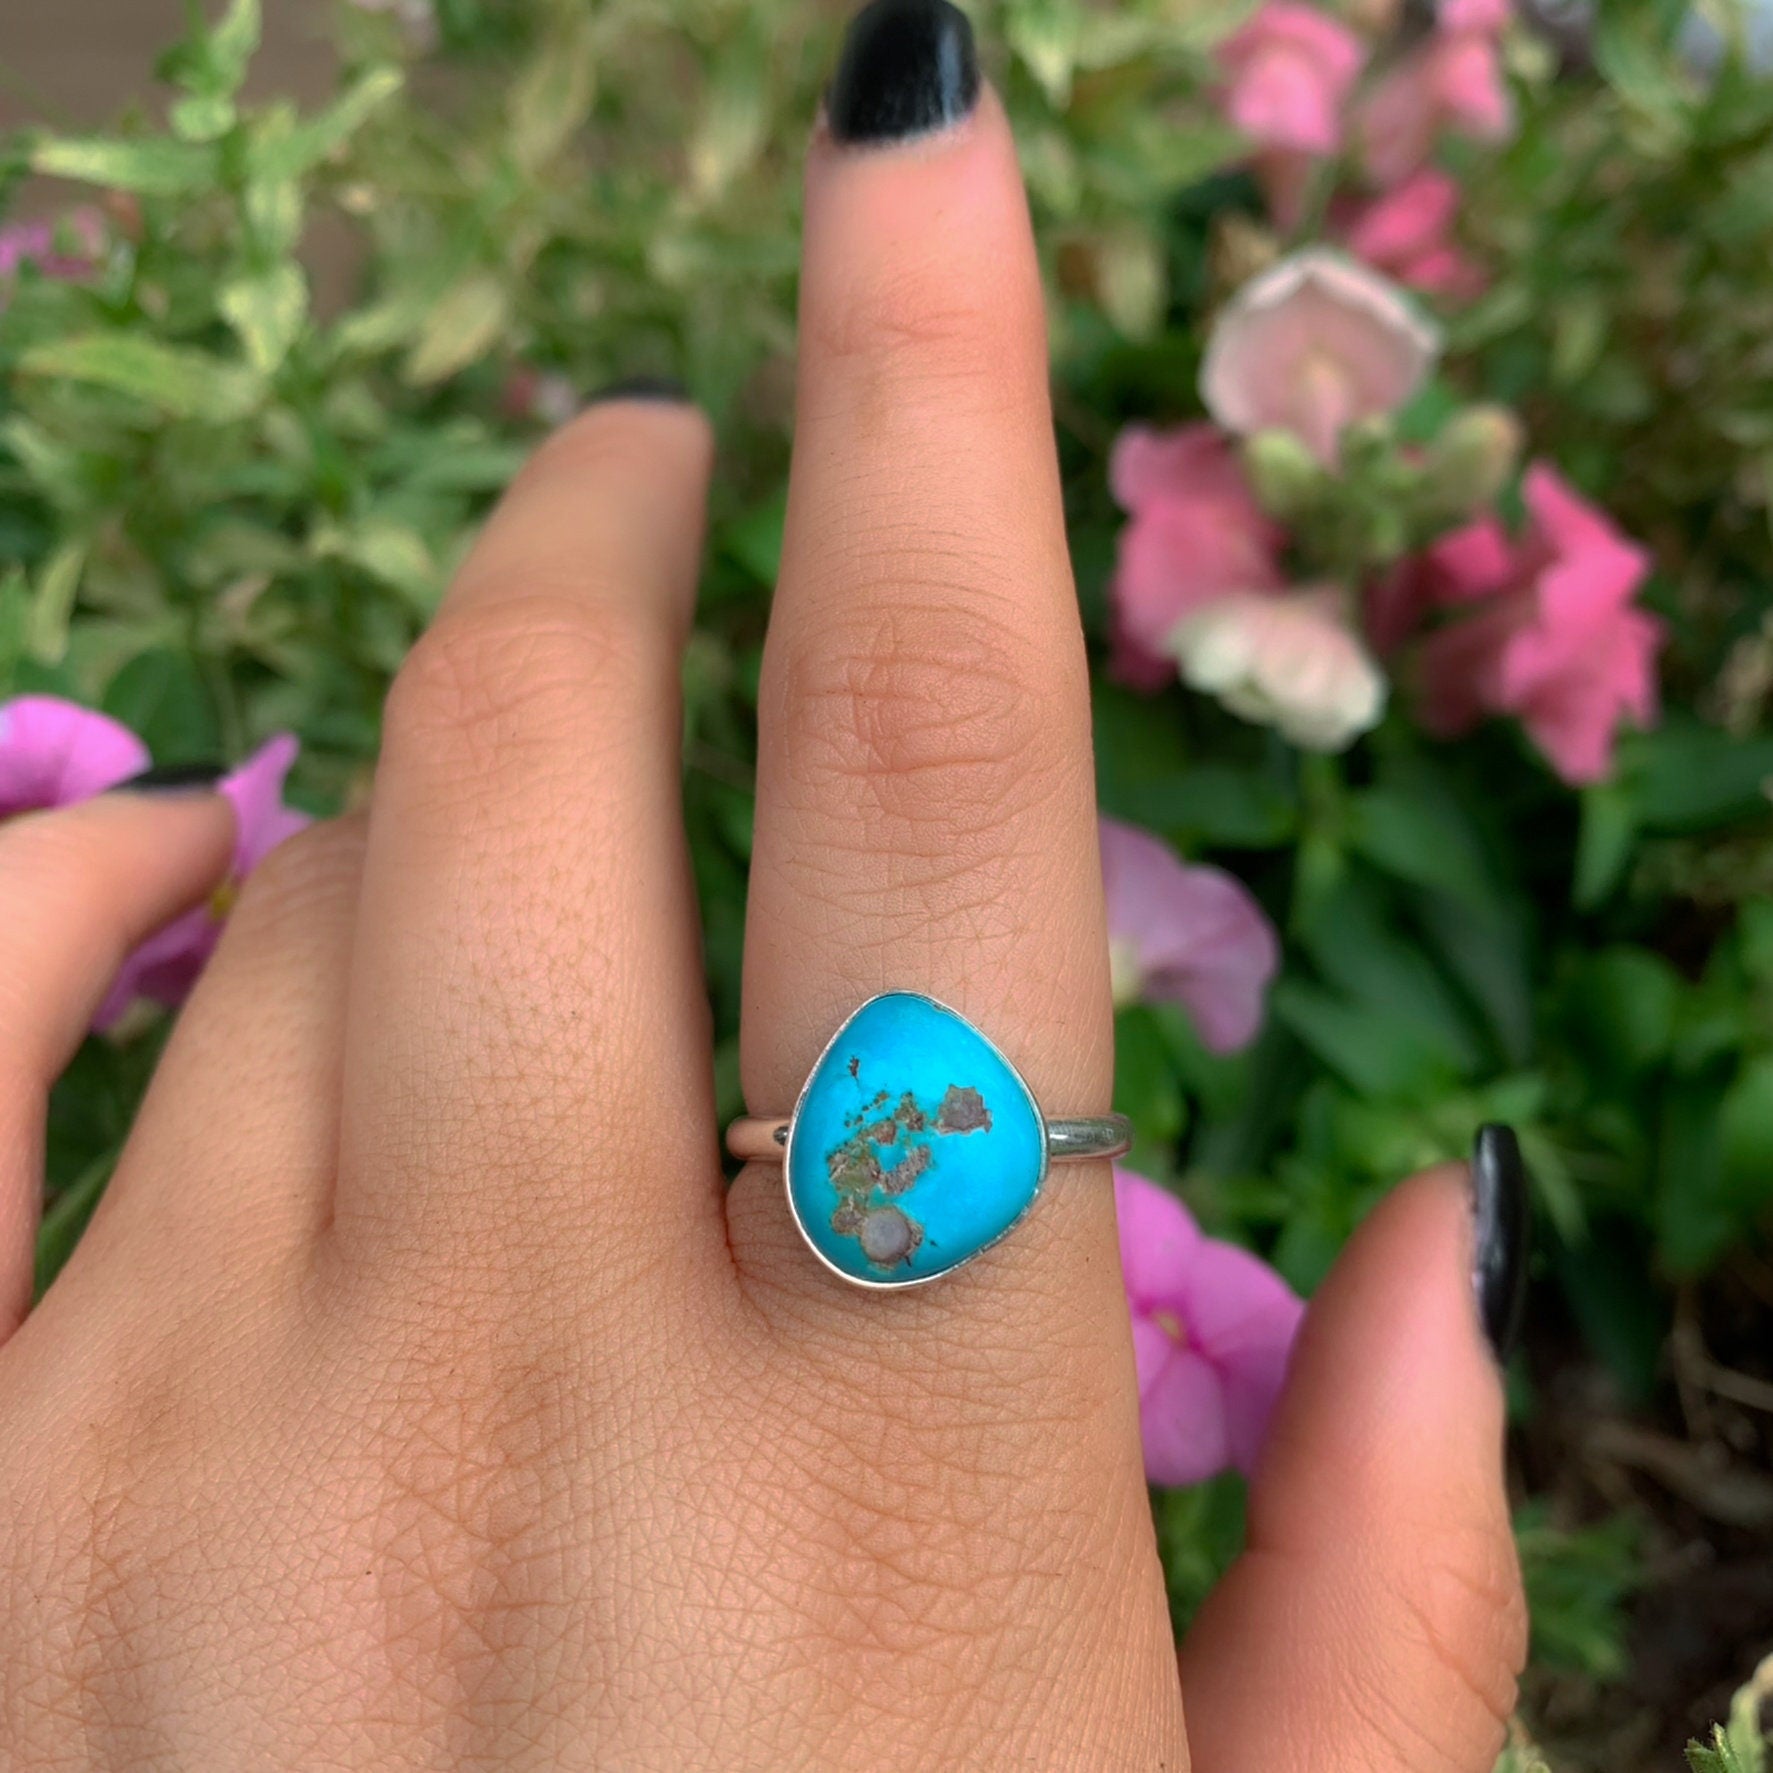 Blue Morenci Turquoise Ring - Size 9 - Sterling Silver - Genuine Turquoise Jewellery - Bright Blue Turquoise Ring - Real Turquoise Ring OOAK